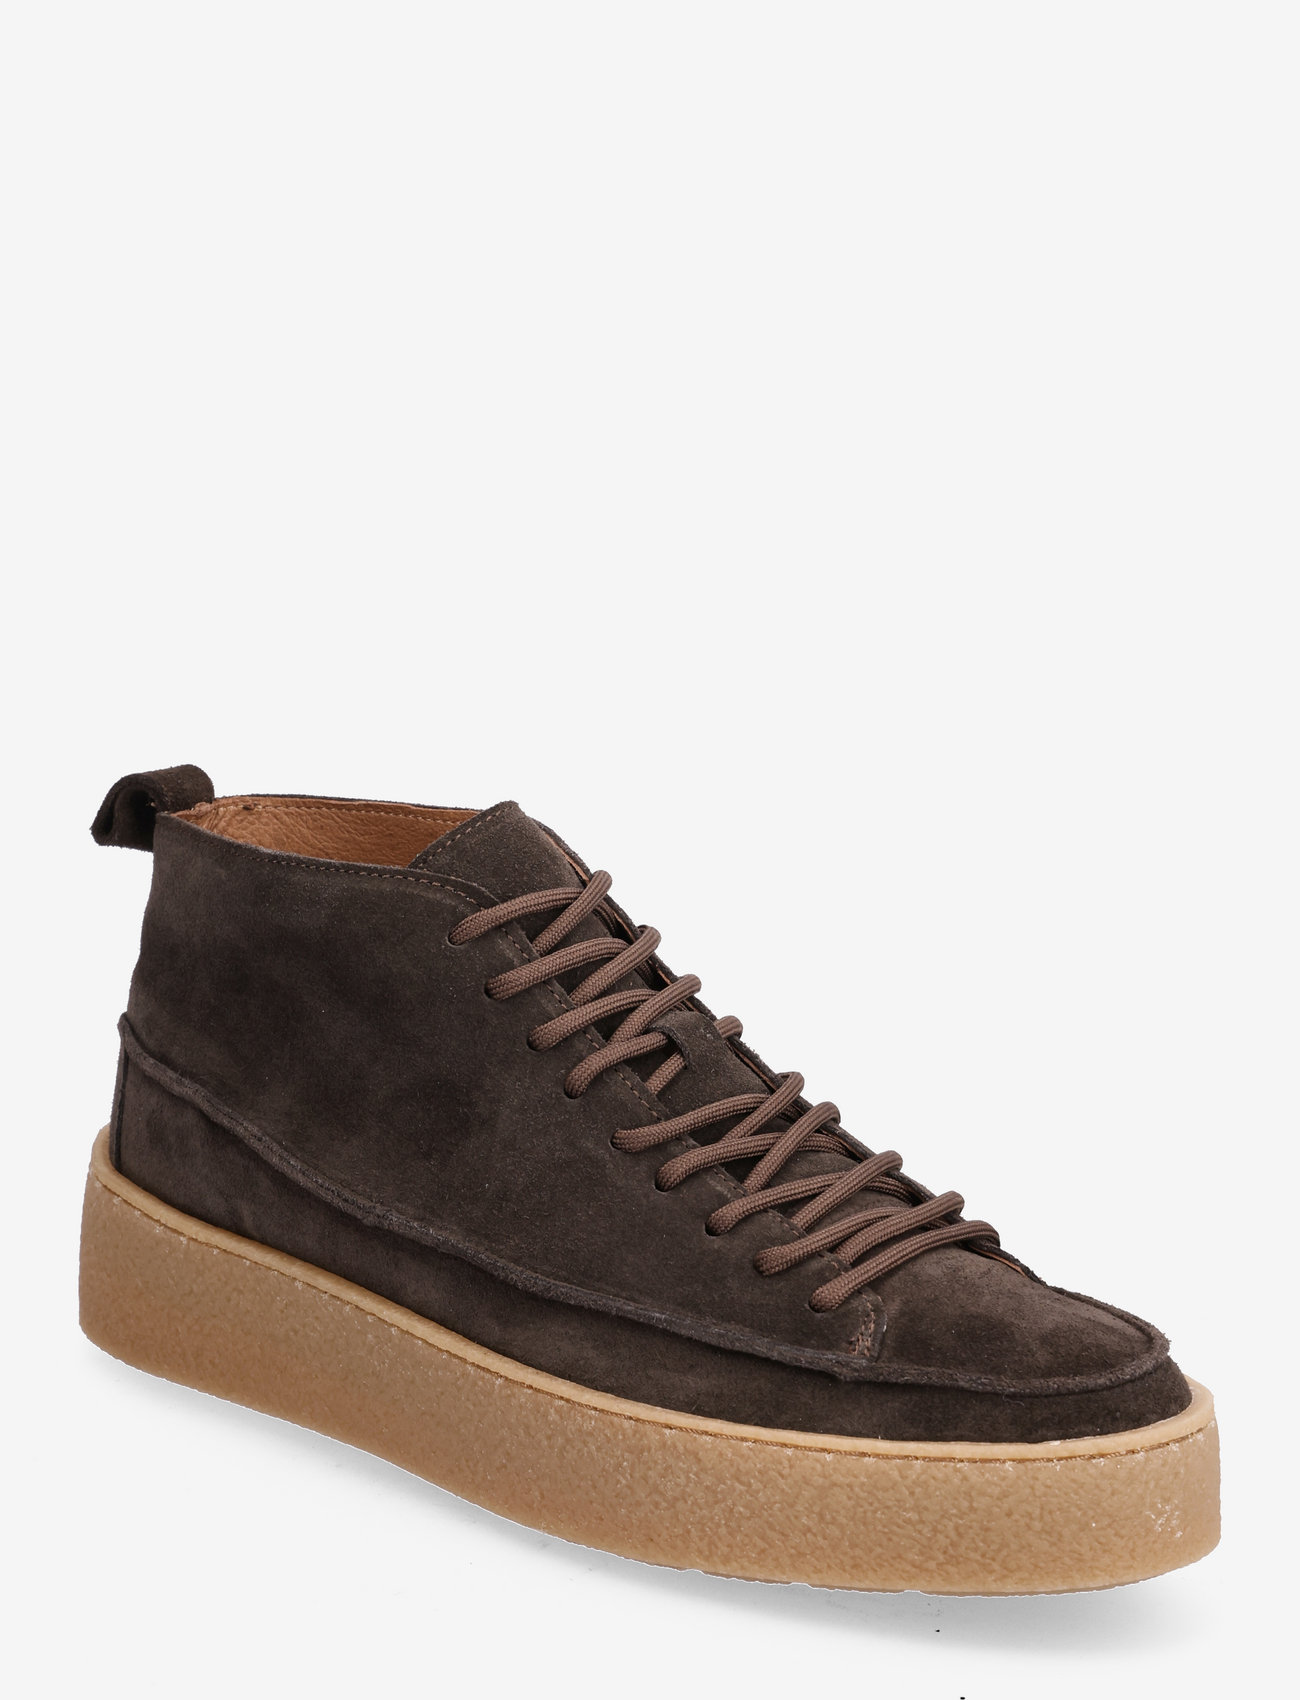 Selected Homme - SLHCRISTER SUEDE BOOT B - laag sneakers - demitasse - 0